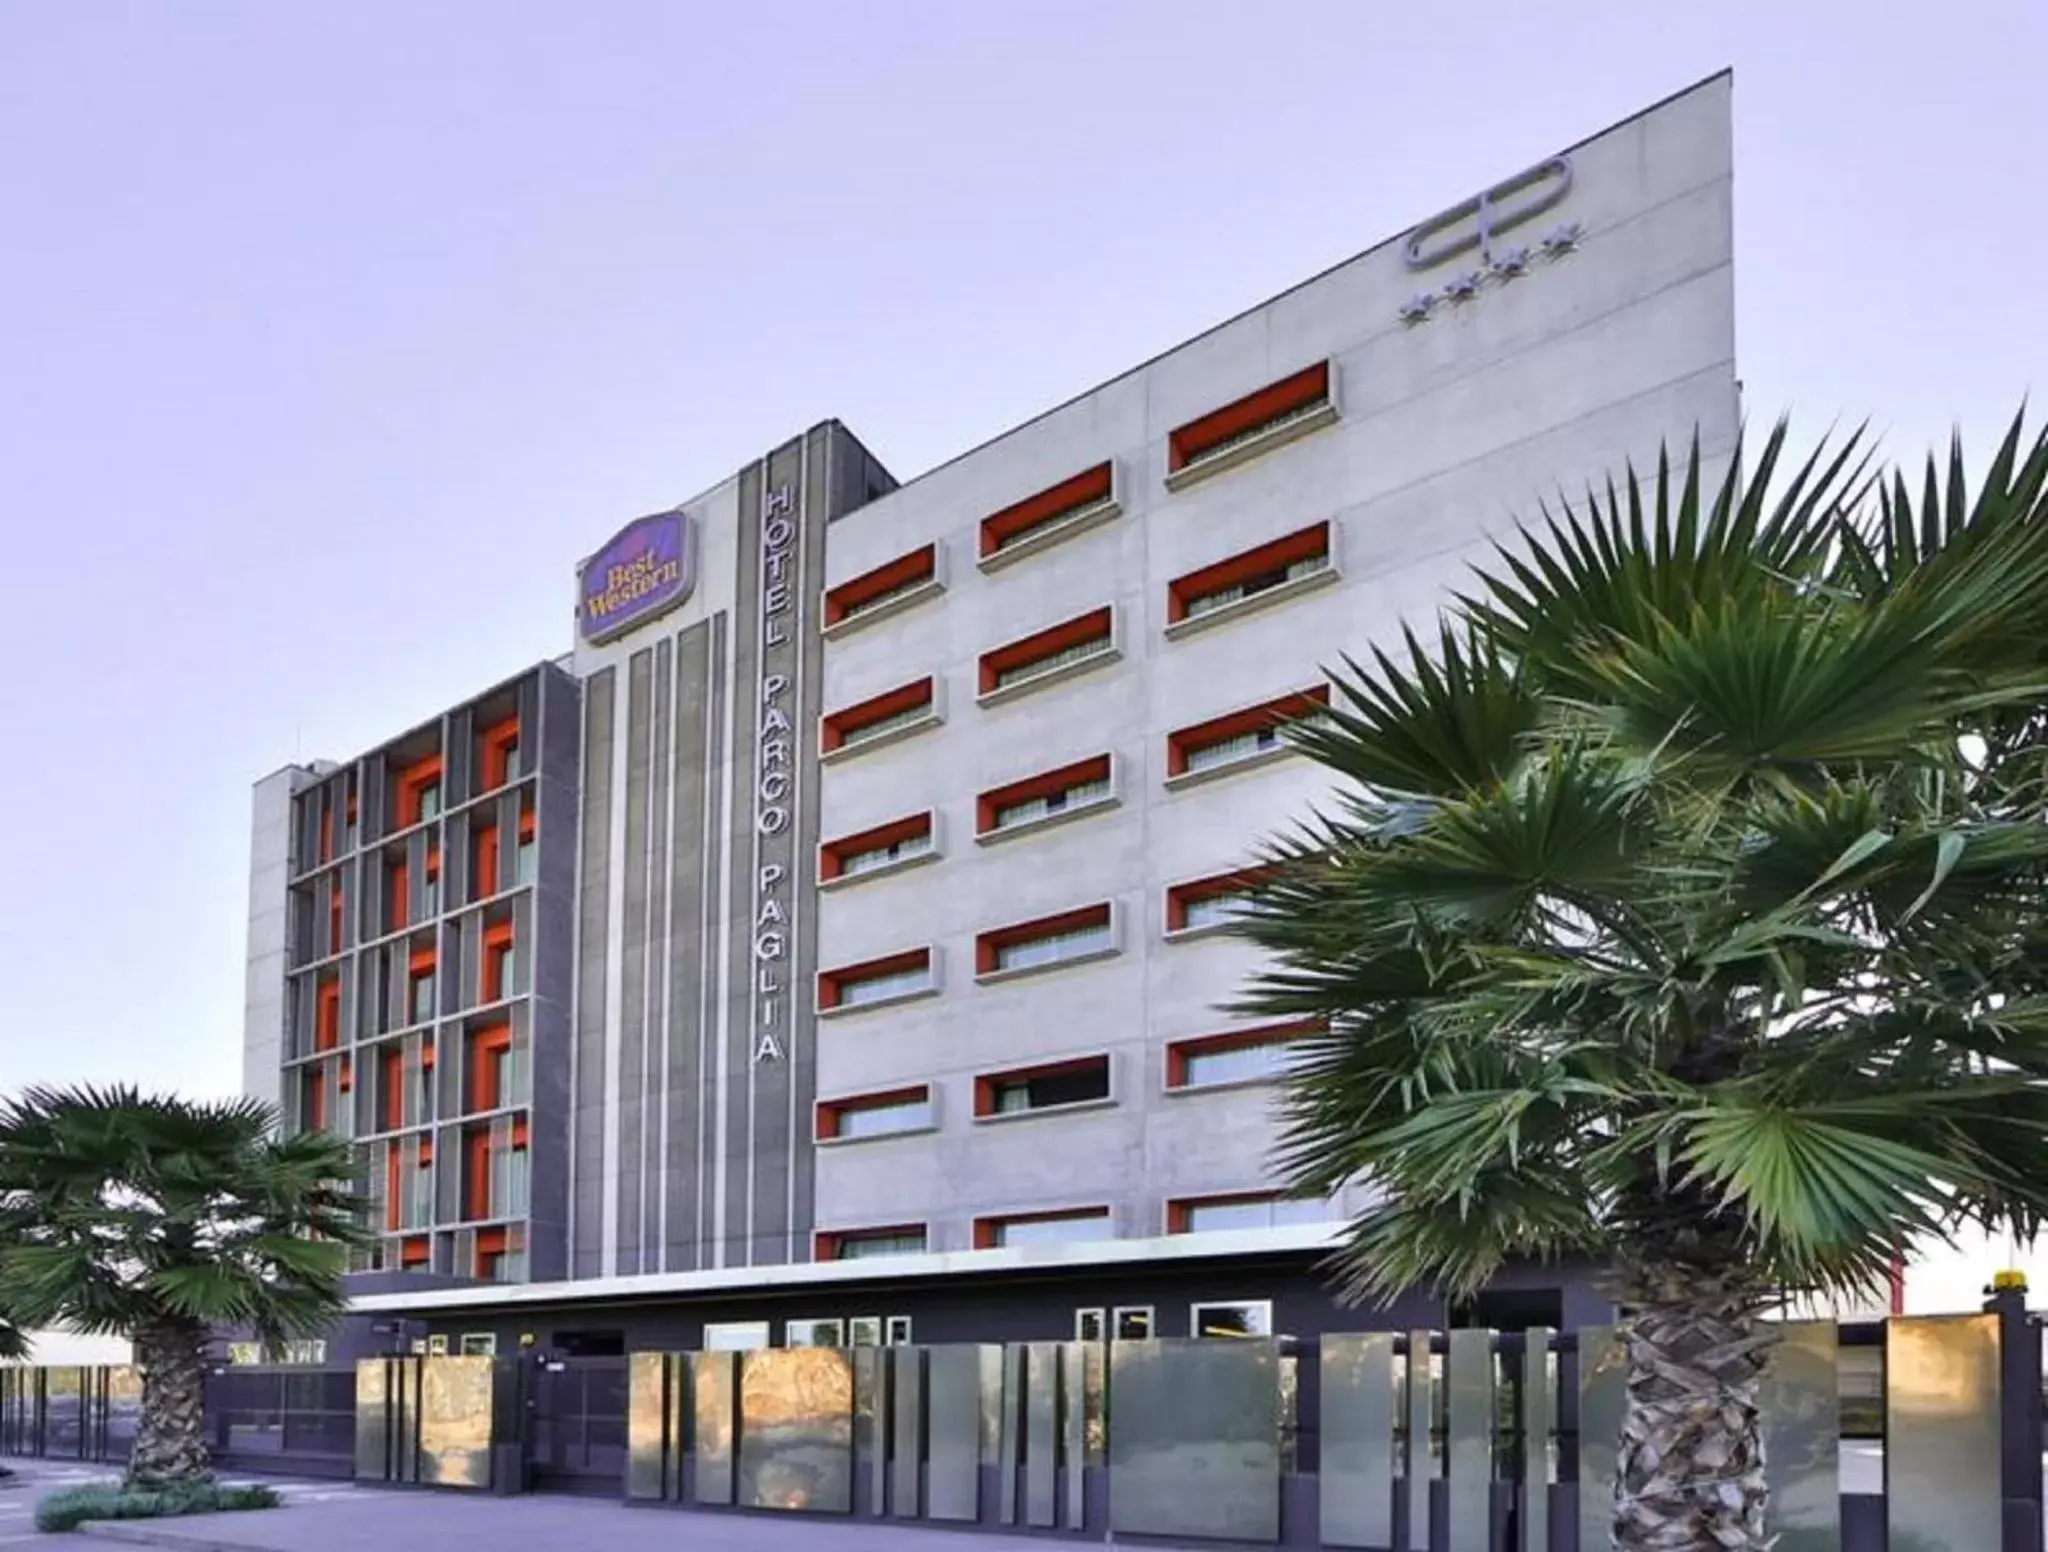 Property Building in Best Western Parco Paglia Hotel